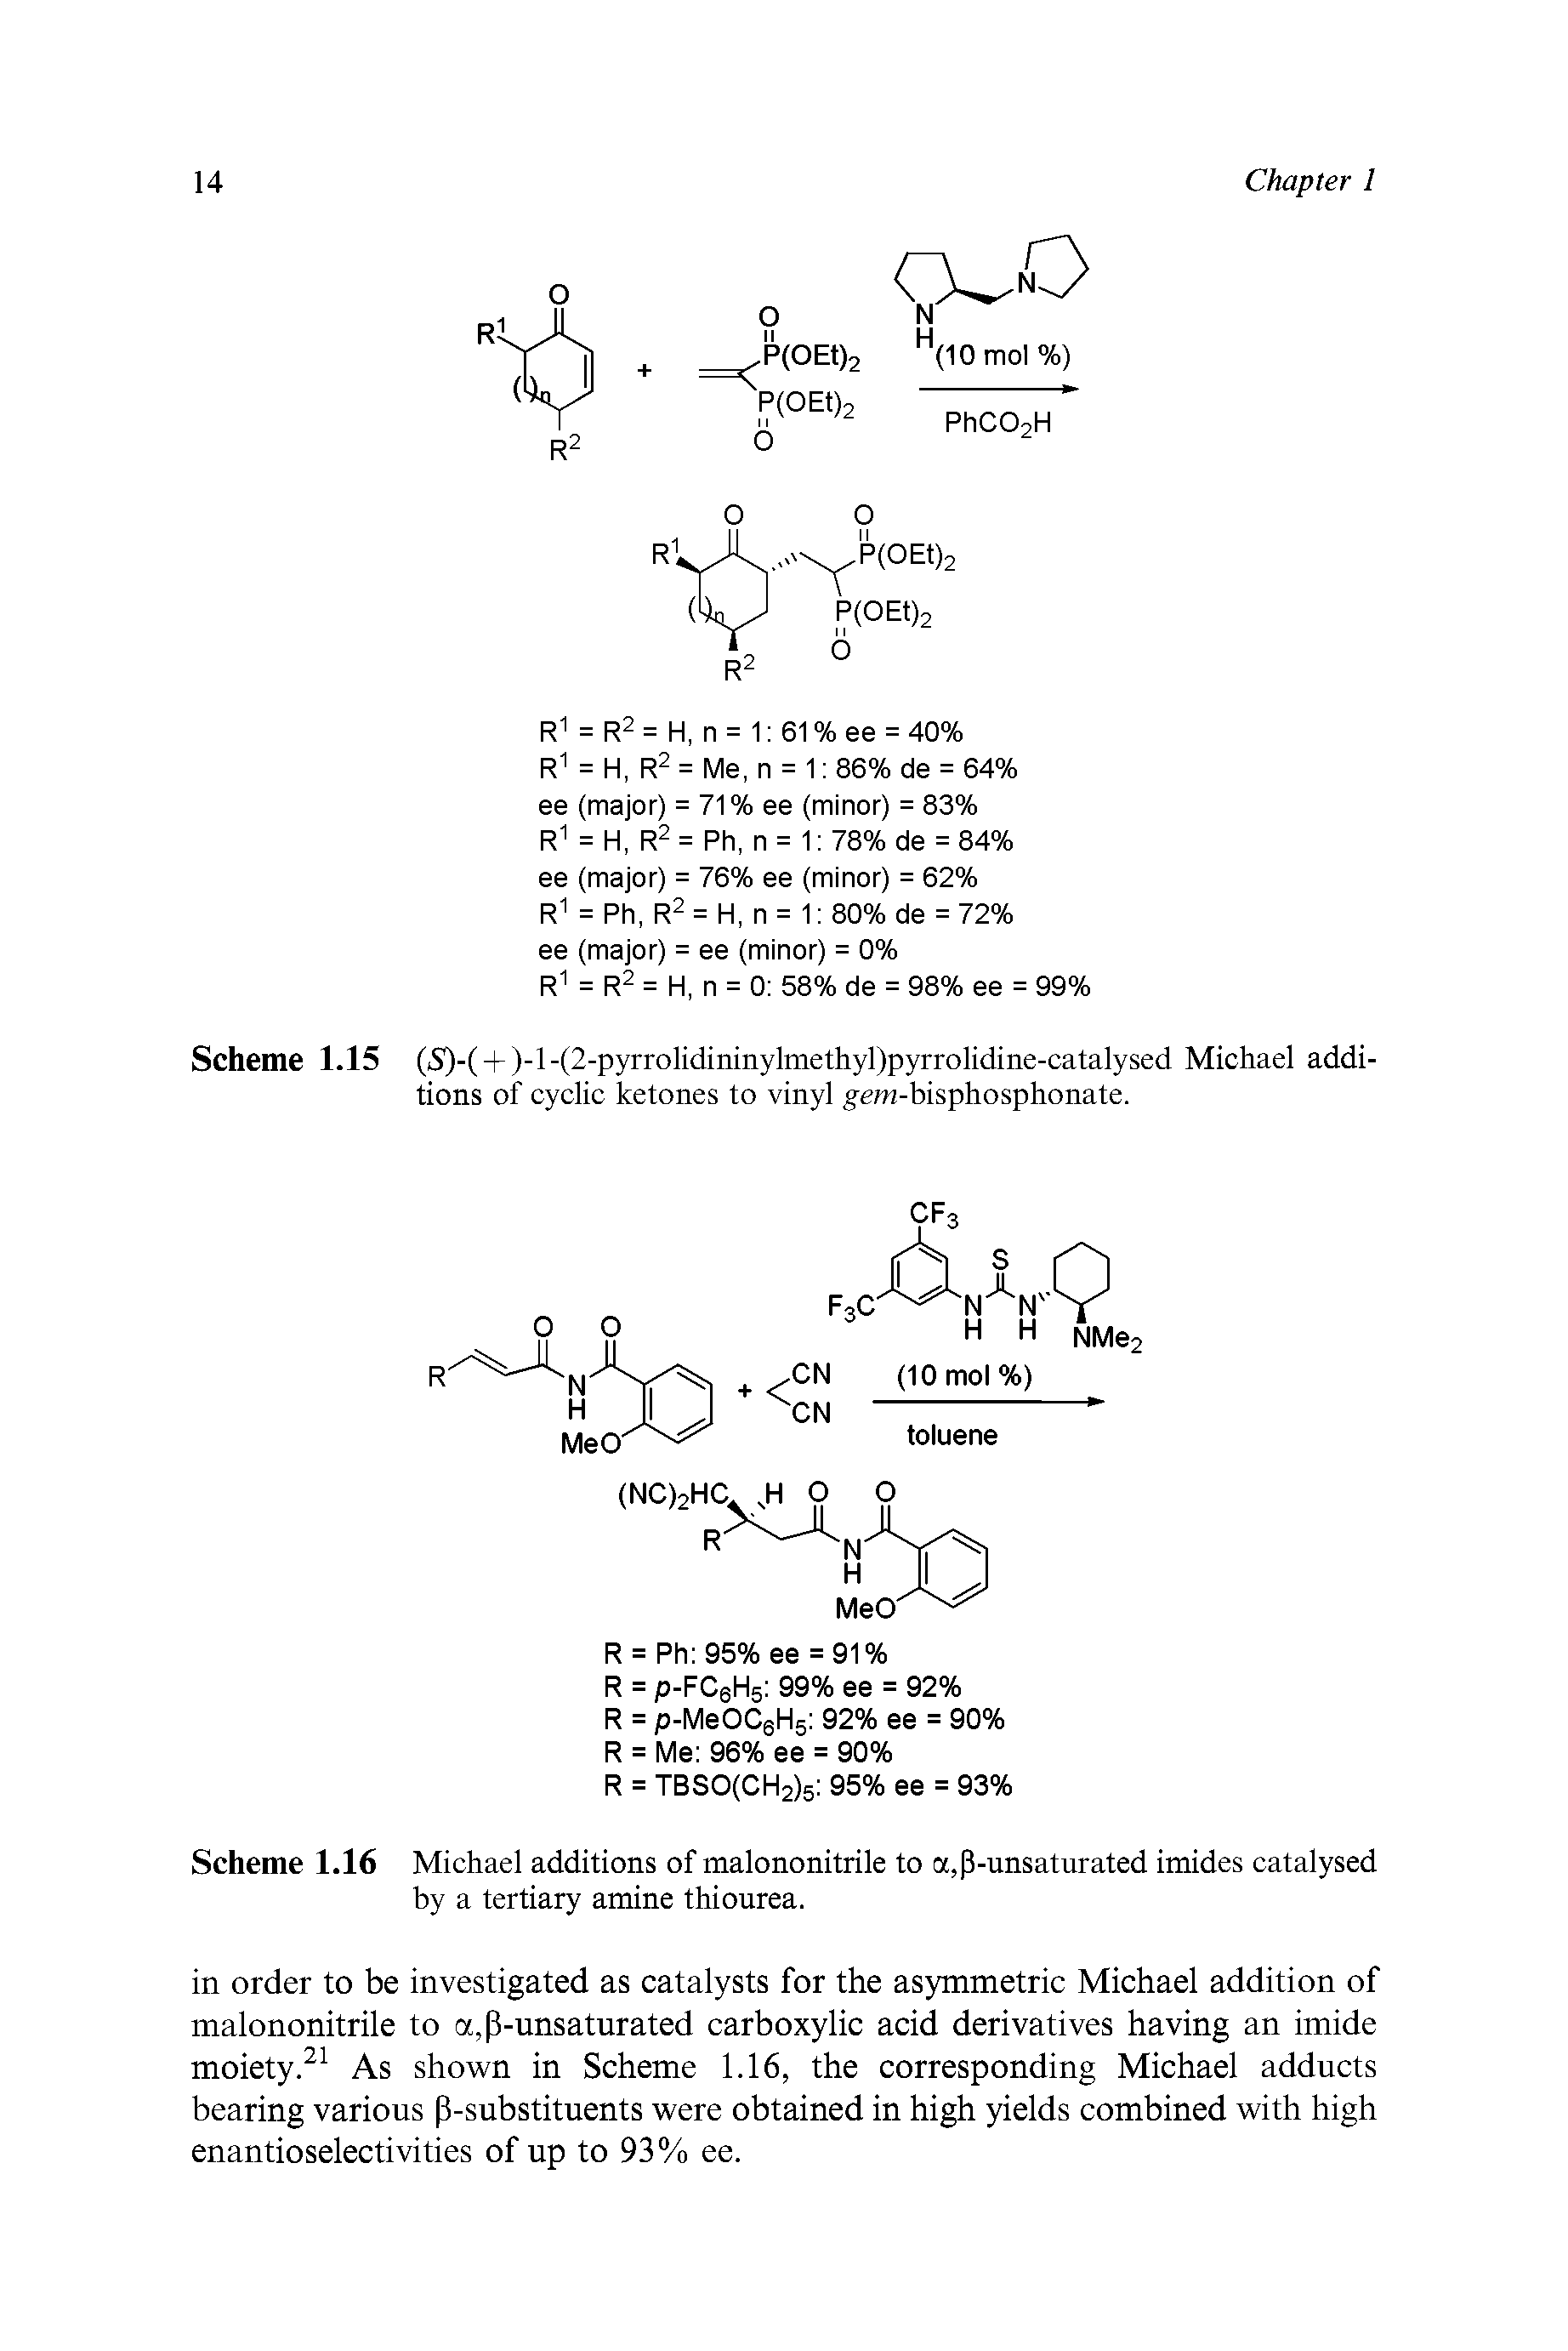 Scheme 1.16 Michael additions of malononitrile to a,P-unsaturated imides catalysed by a tertiary amine thiourea.